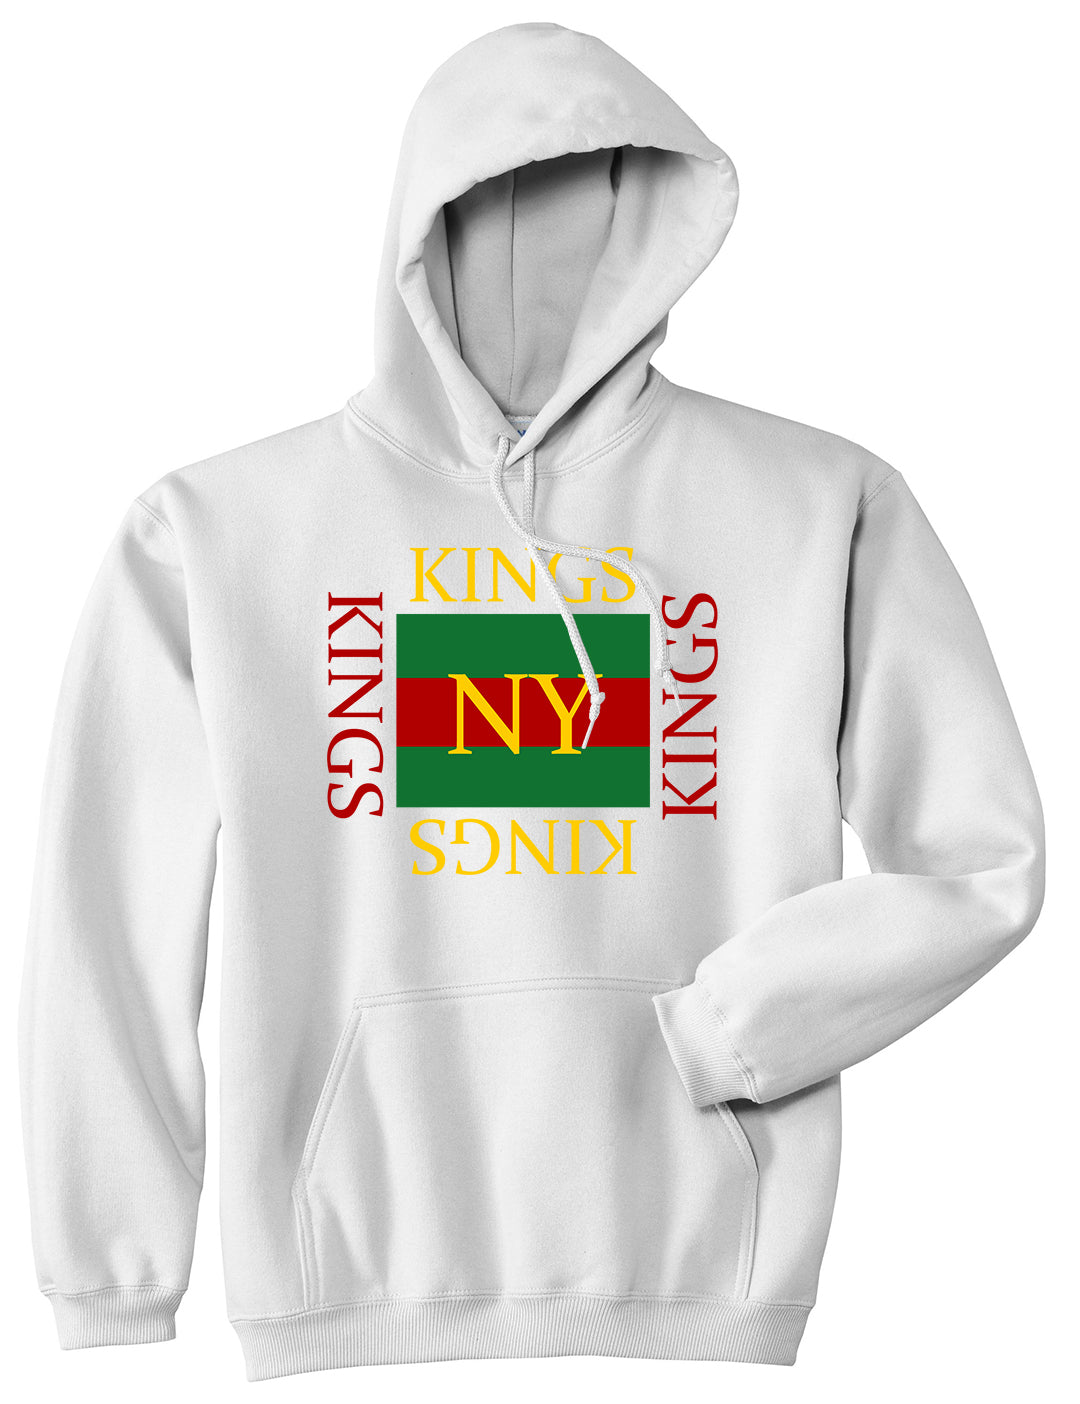 KINGS Bootleg High Fashion Pullover Hoodie in White